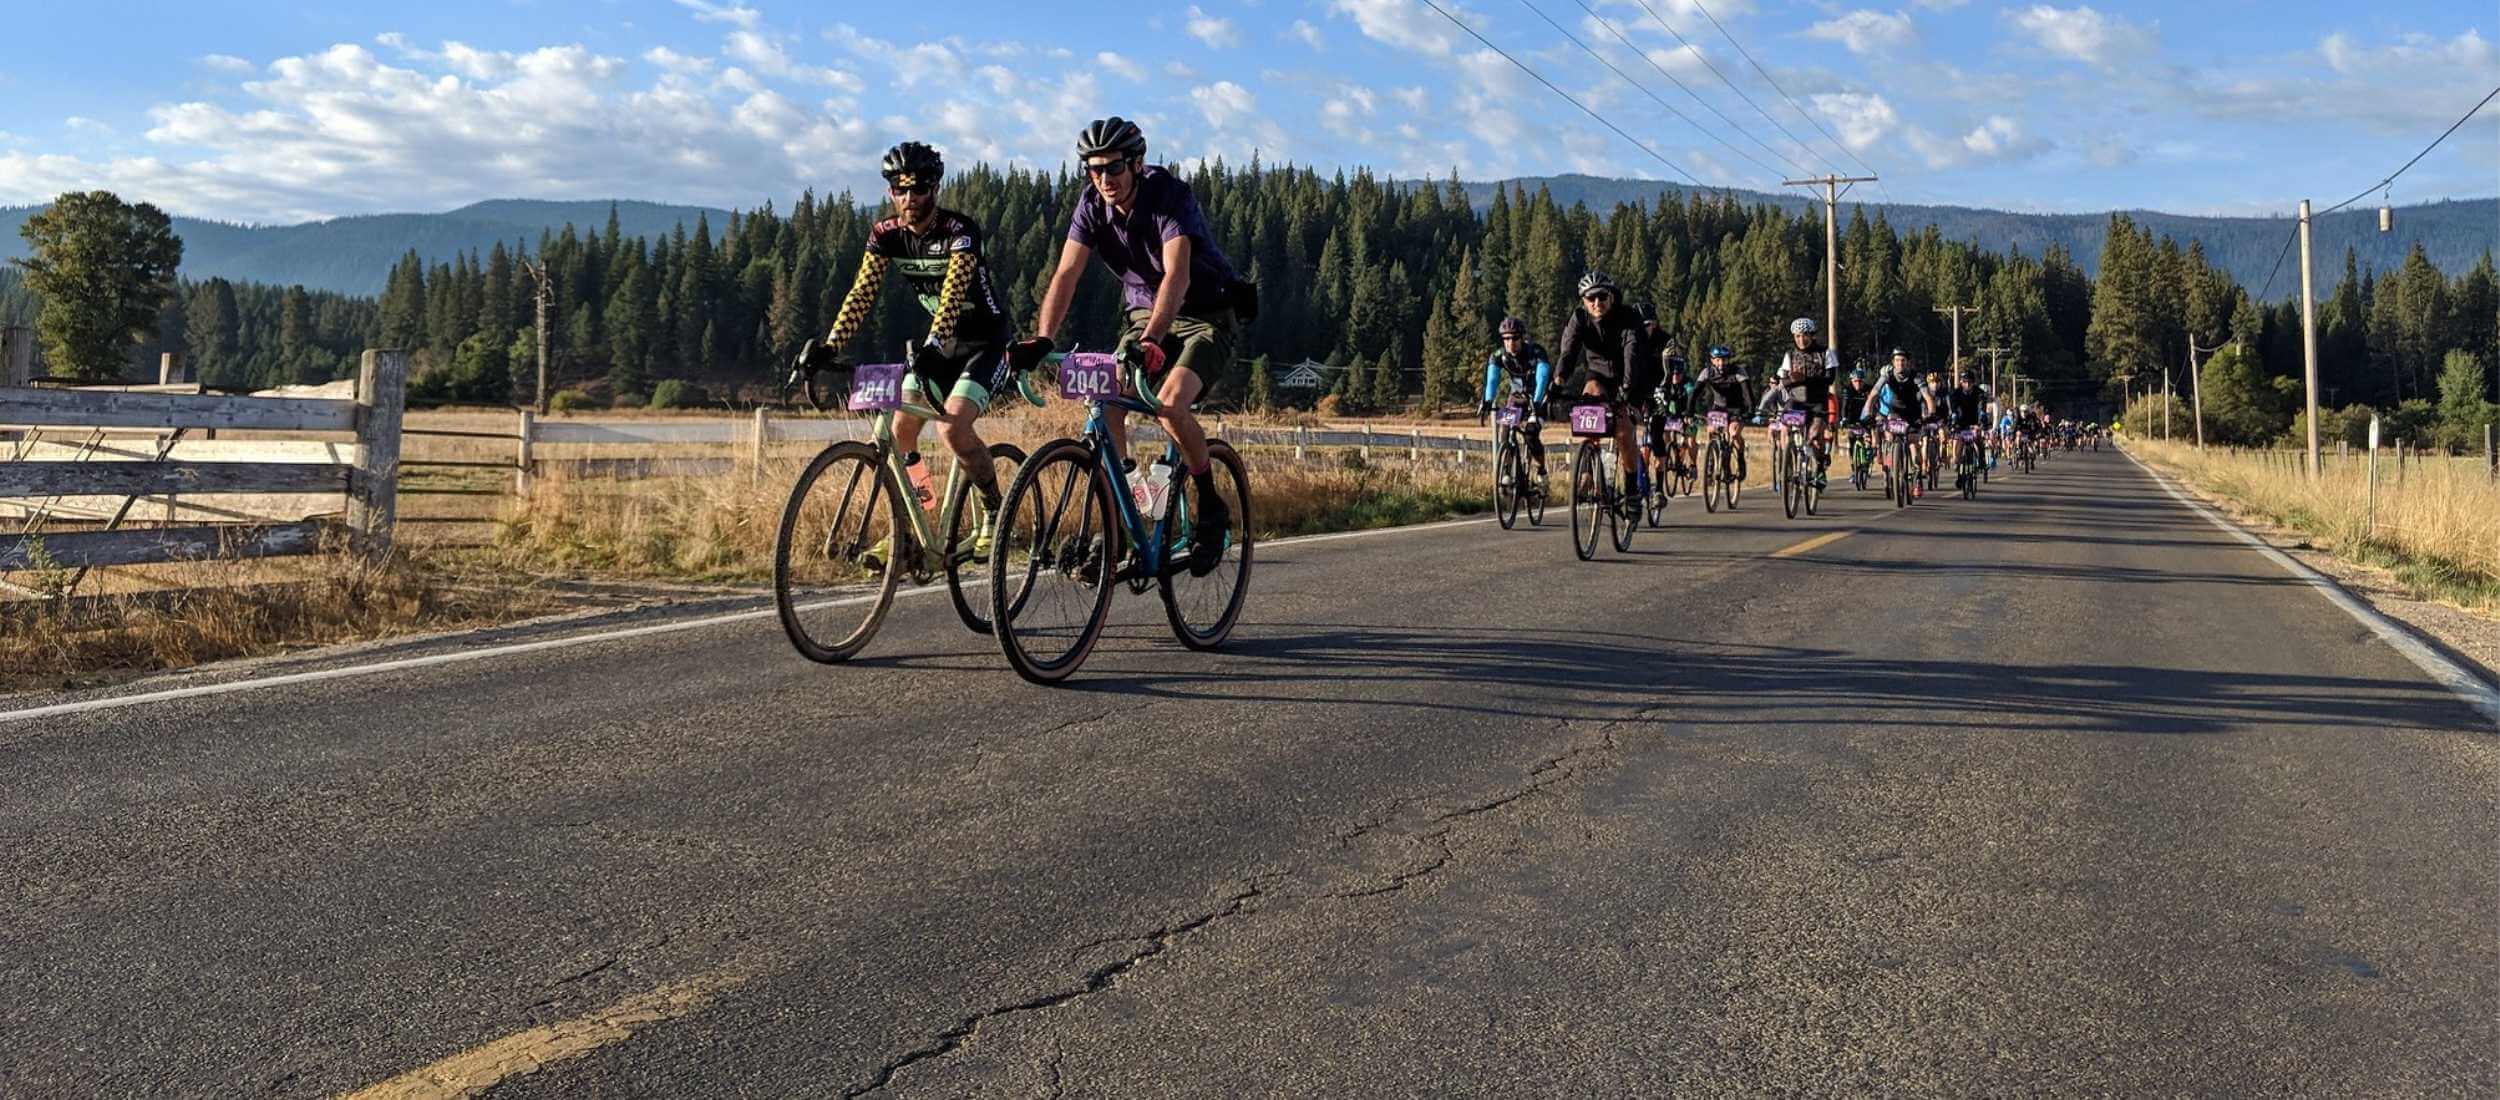 Cyclists on a rural road in Northern California